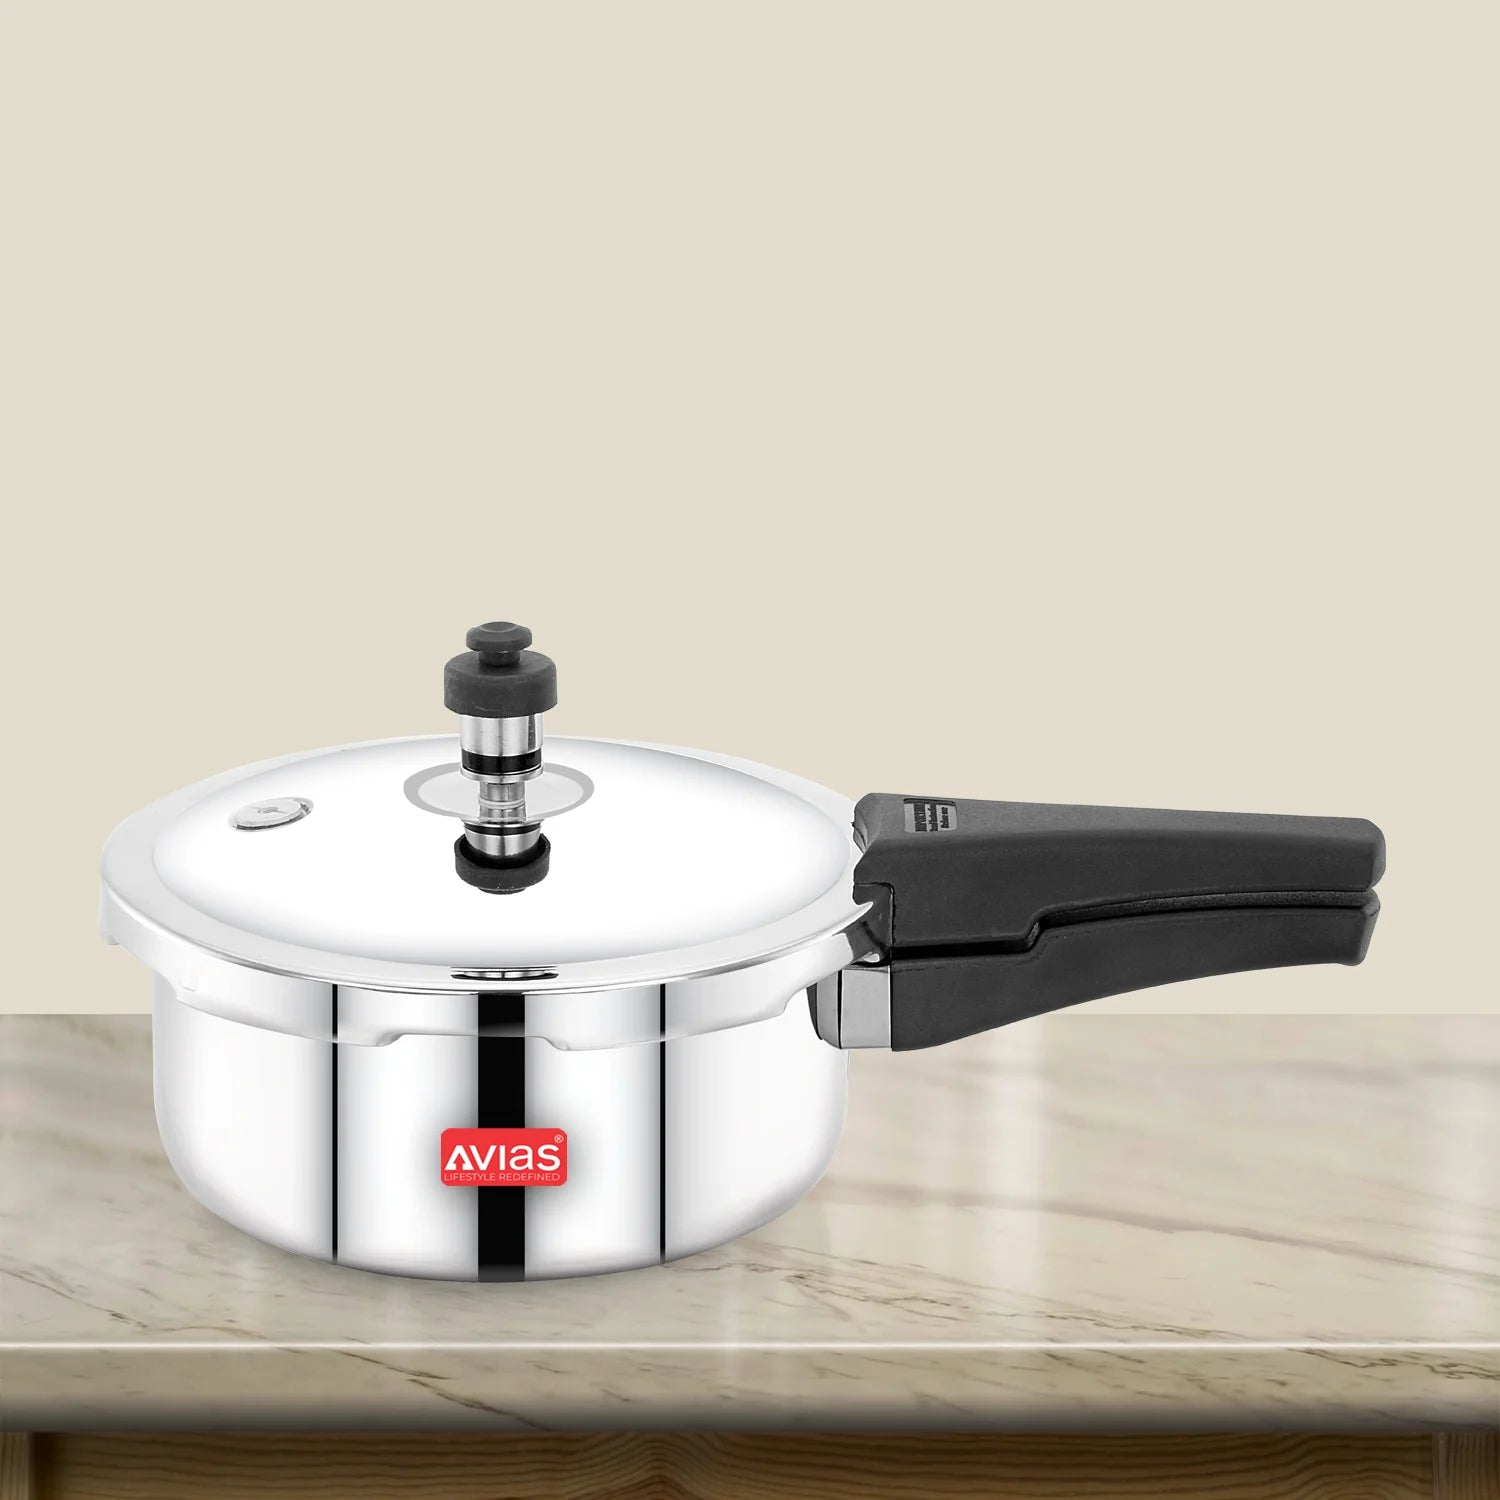 AVIAS Riara Premium Stainless Steel Triply Pressure Cooker with outer lid